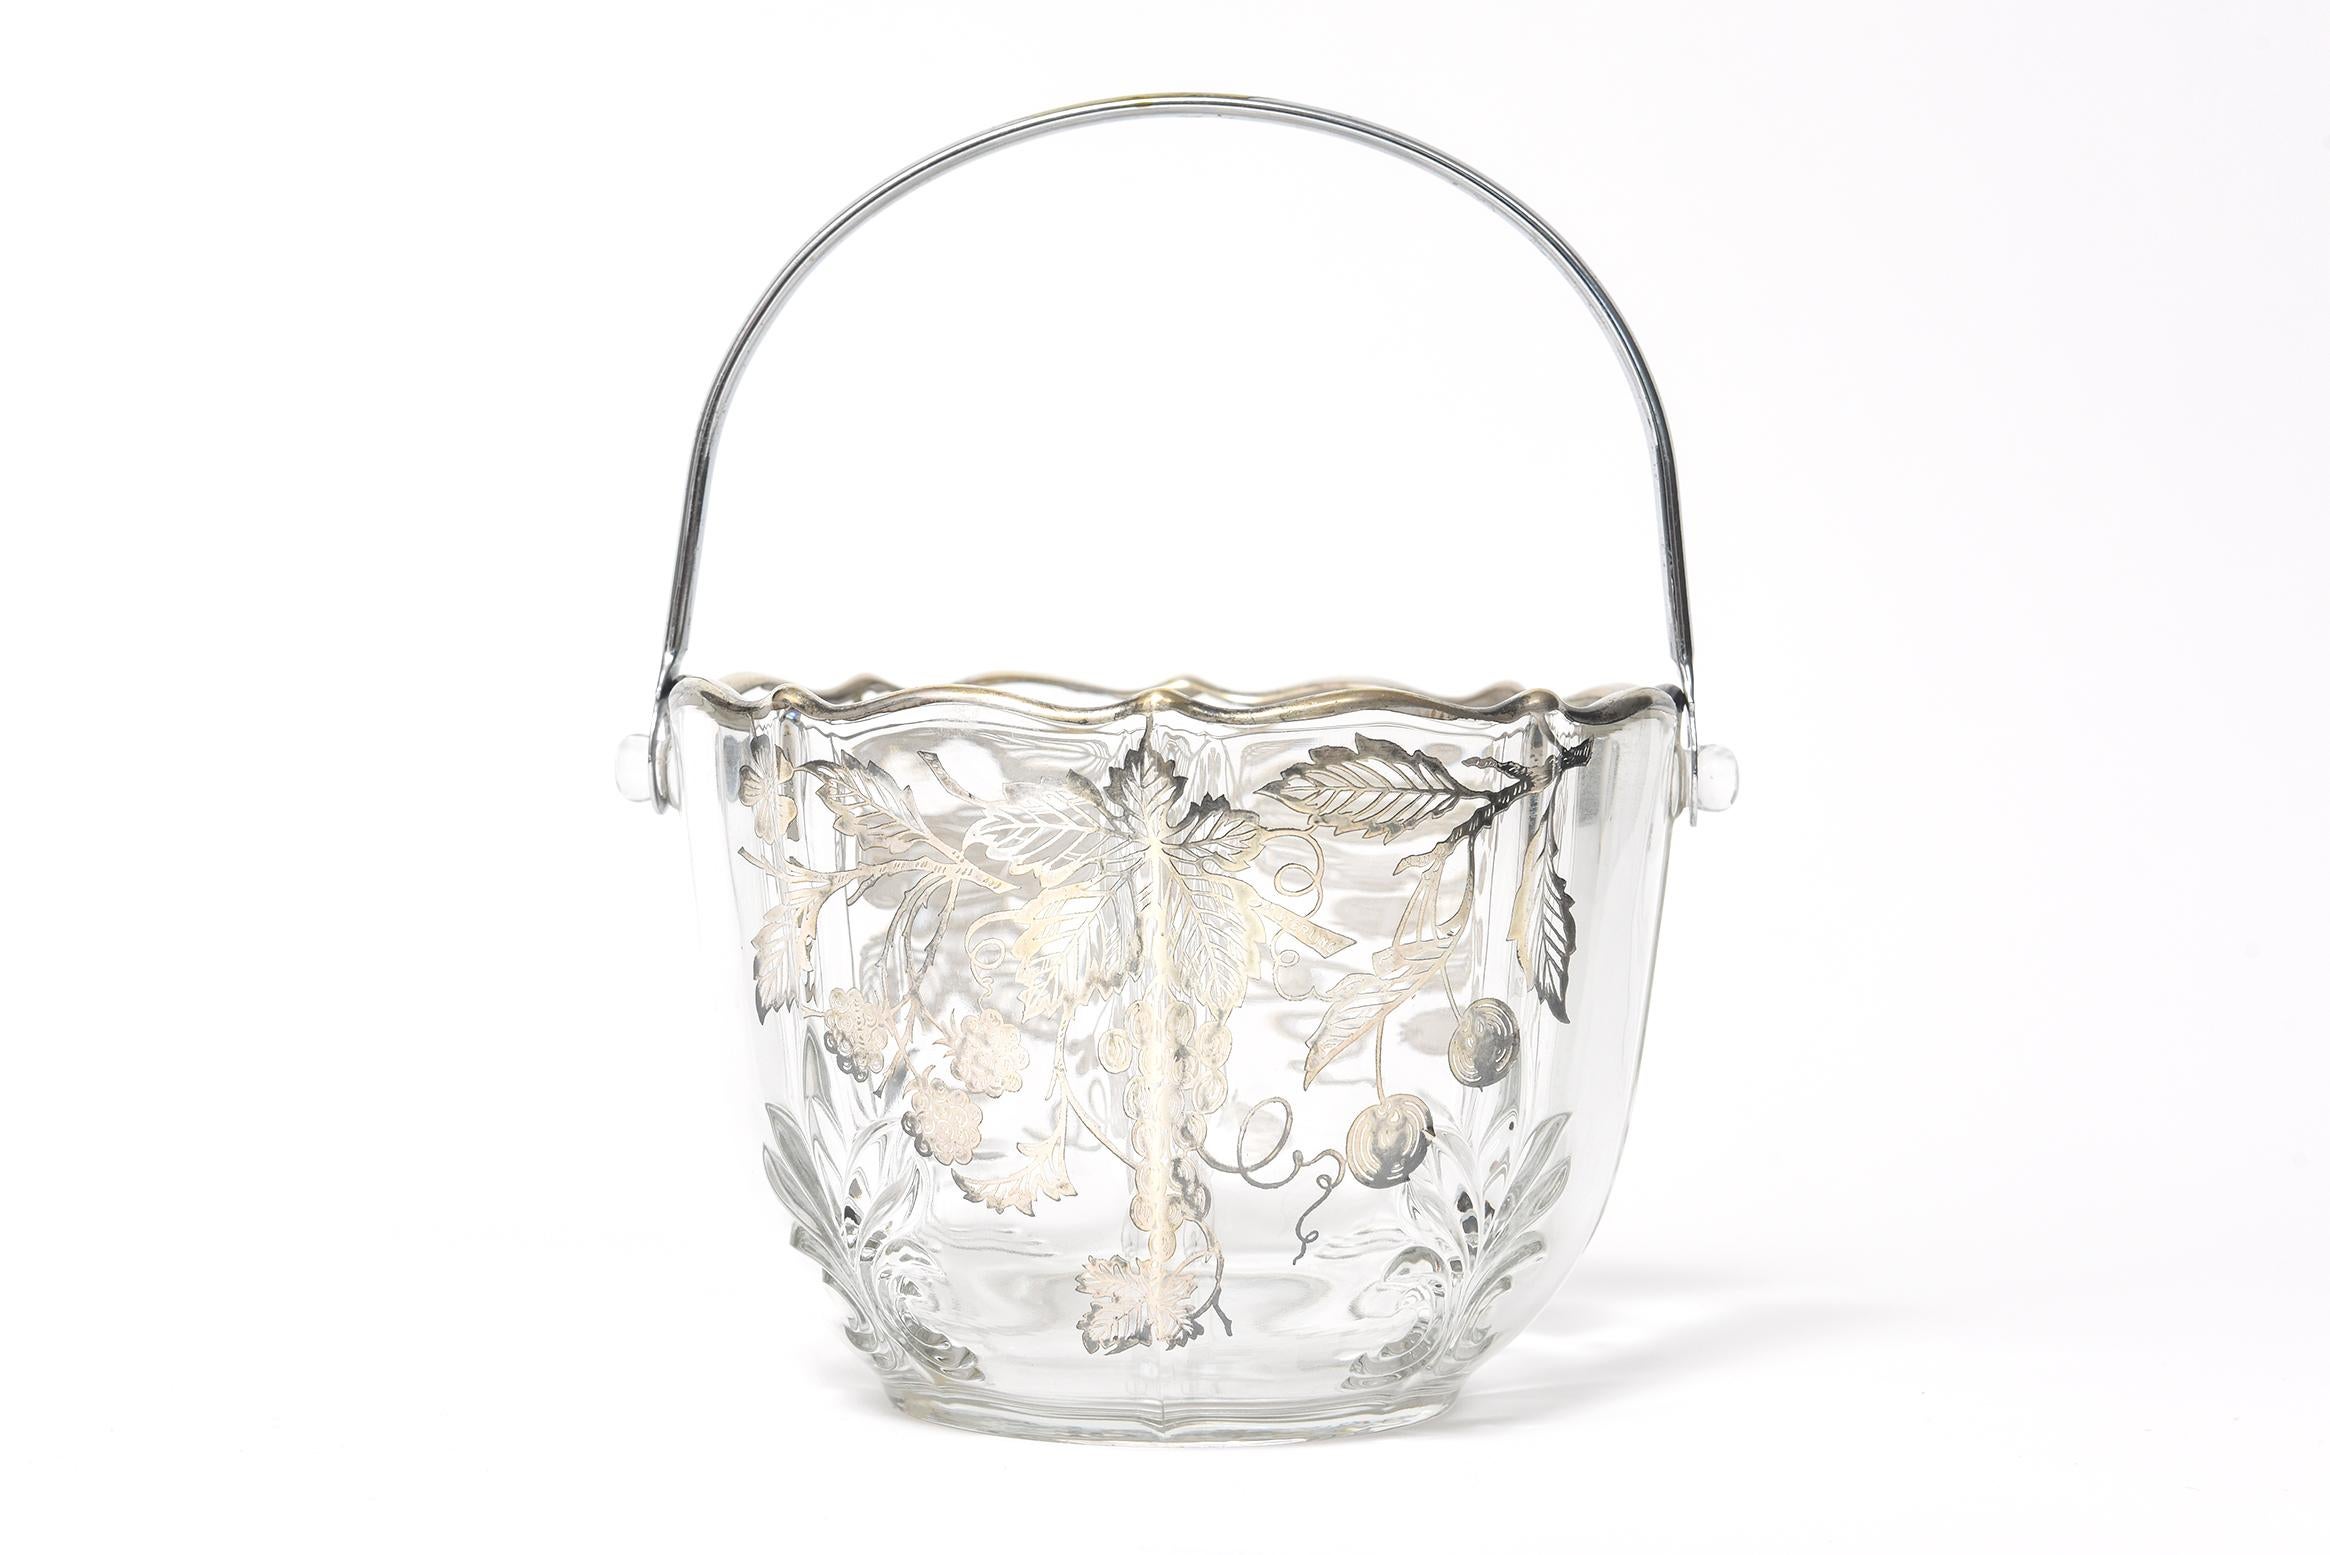 Sterling Silver Overlay Glass Fruit and Flower Basket Bowl Ice Bucket In Good Condition For Sale In Miami Beach, FL